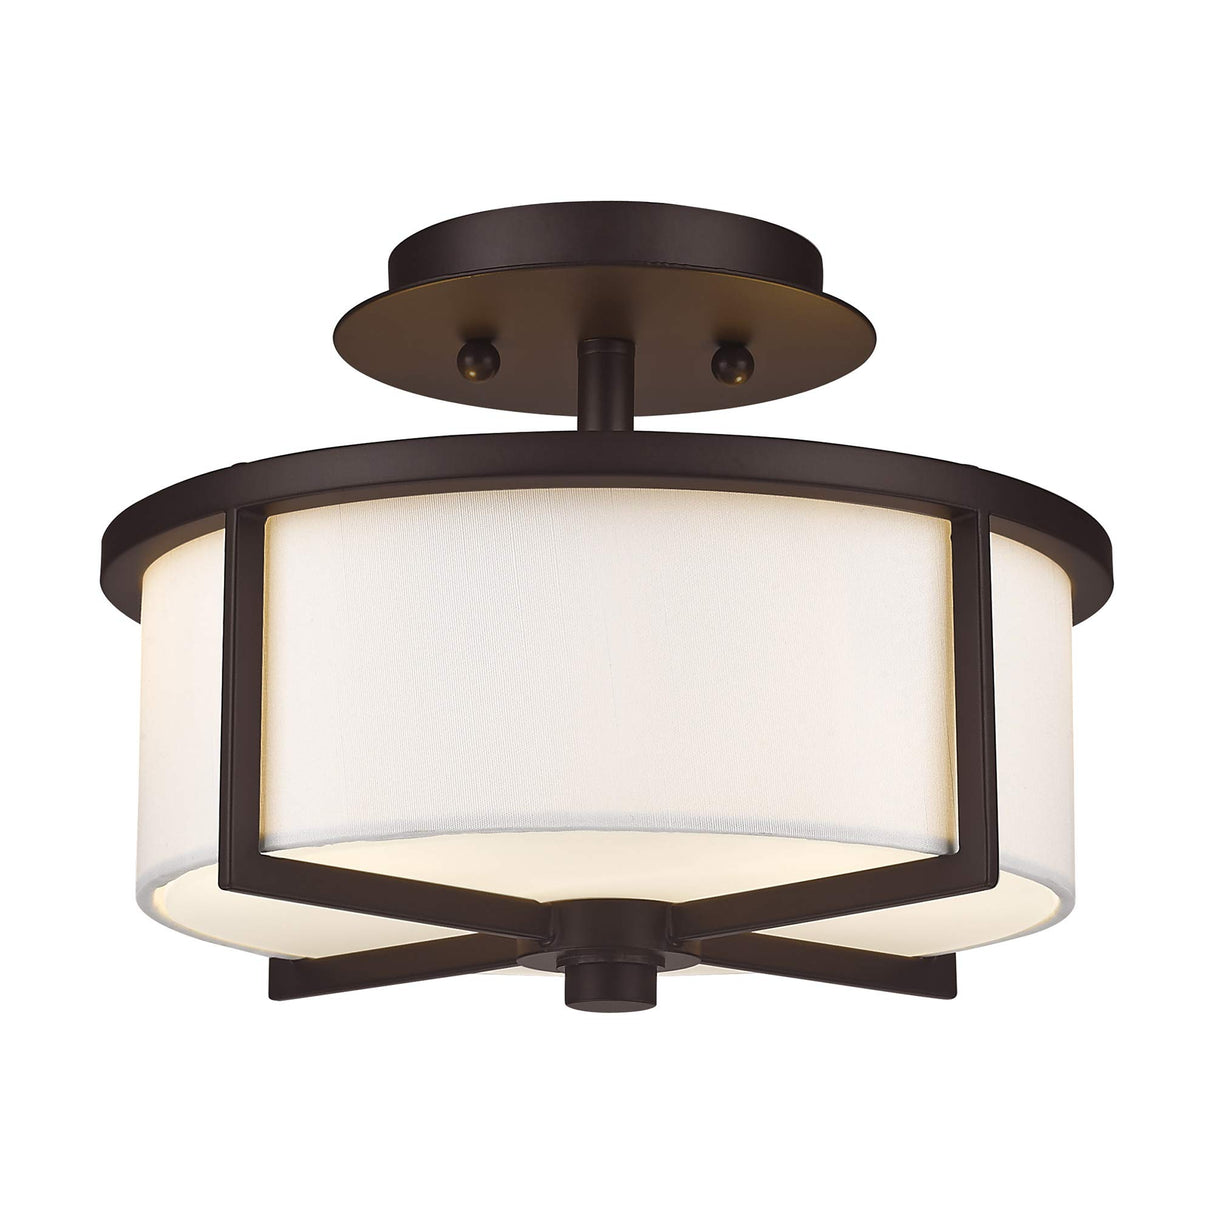 Livex Lighting 51072-07 Transitional Two Light Ceiling Mount from Wesley Collection in Bronze/Dark Finish